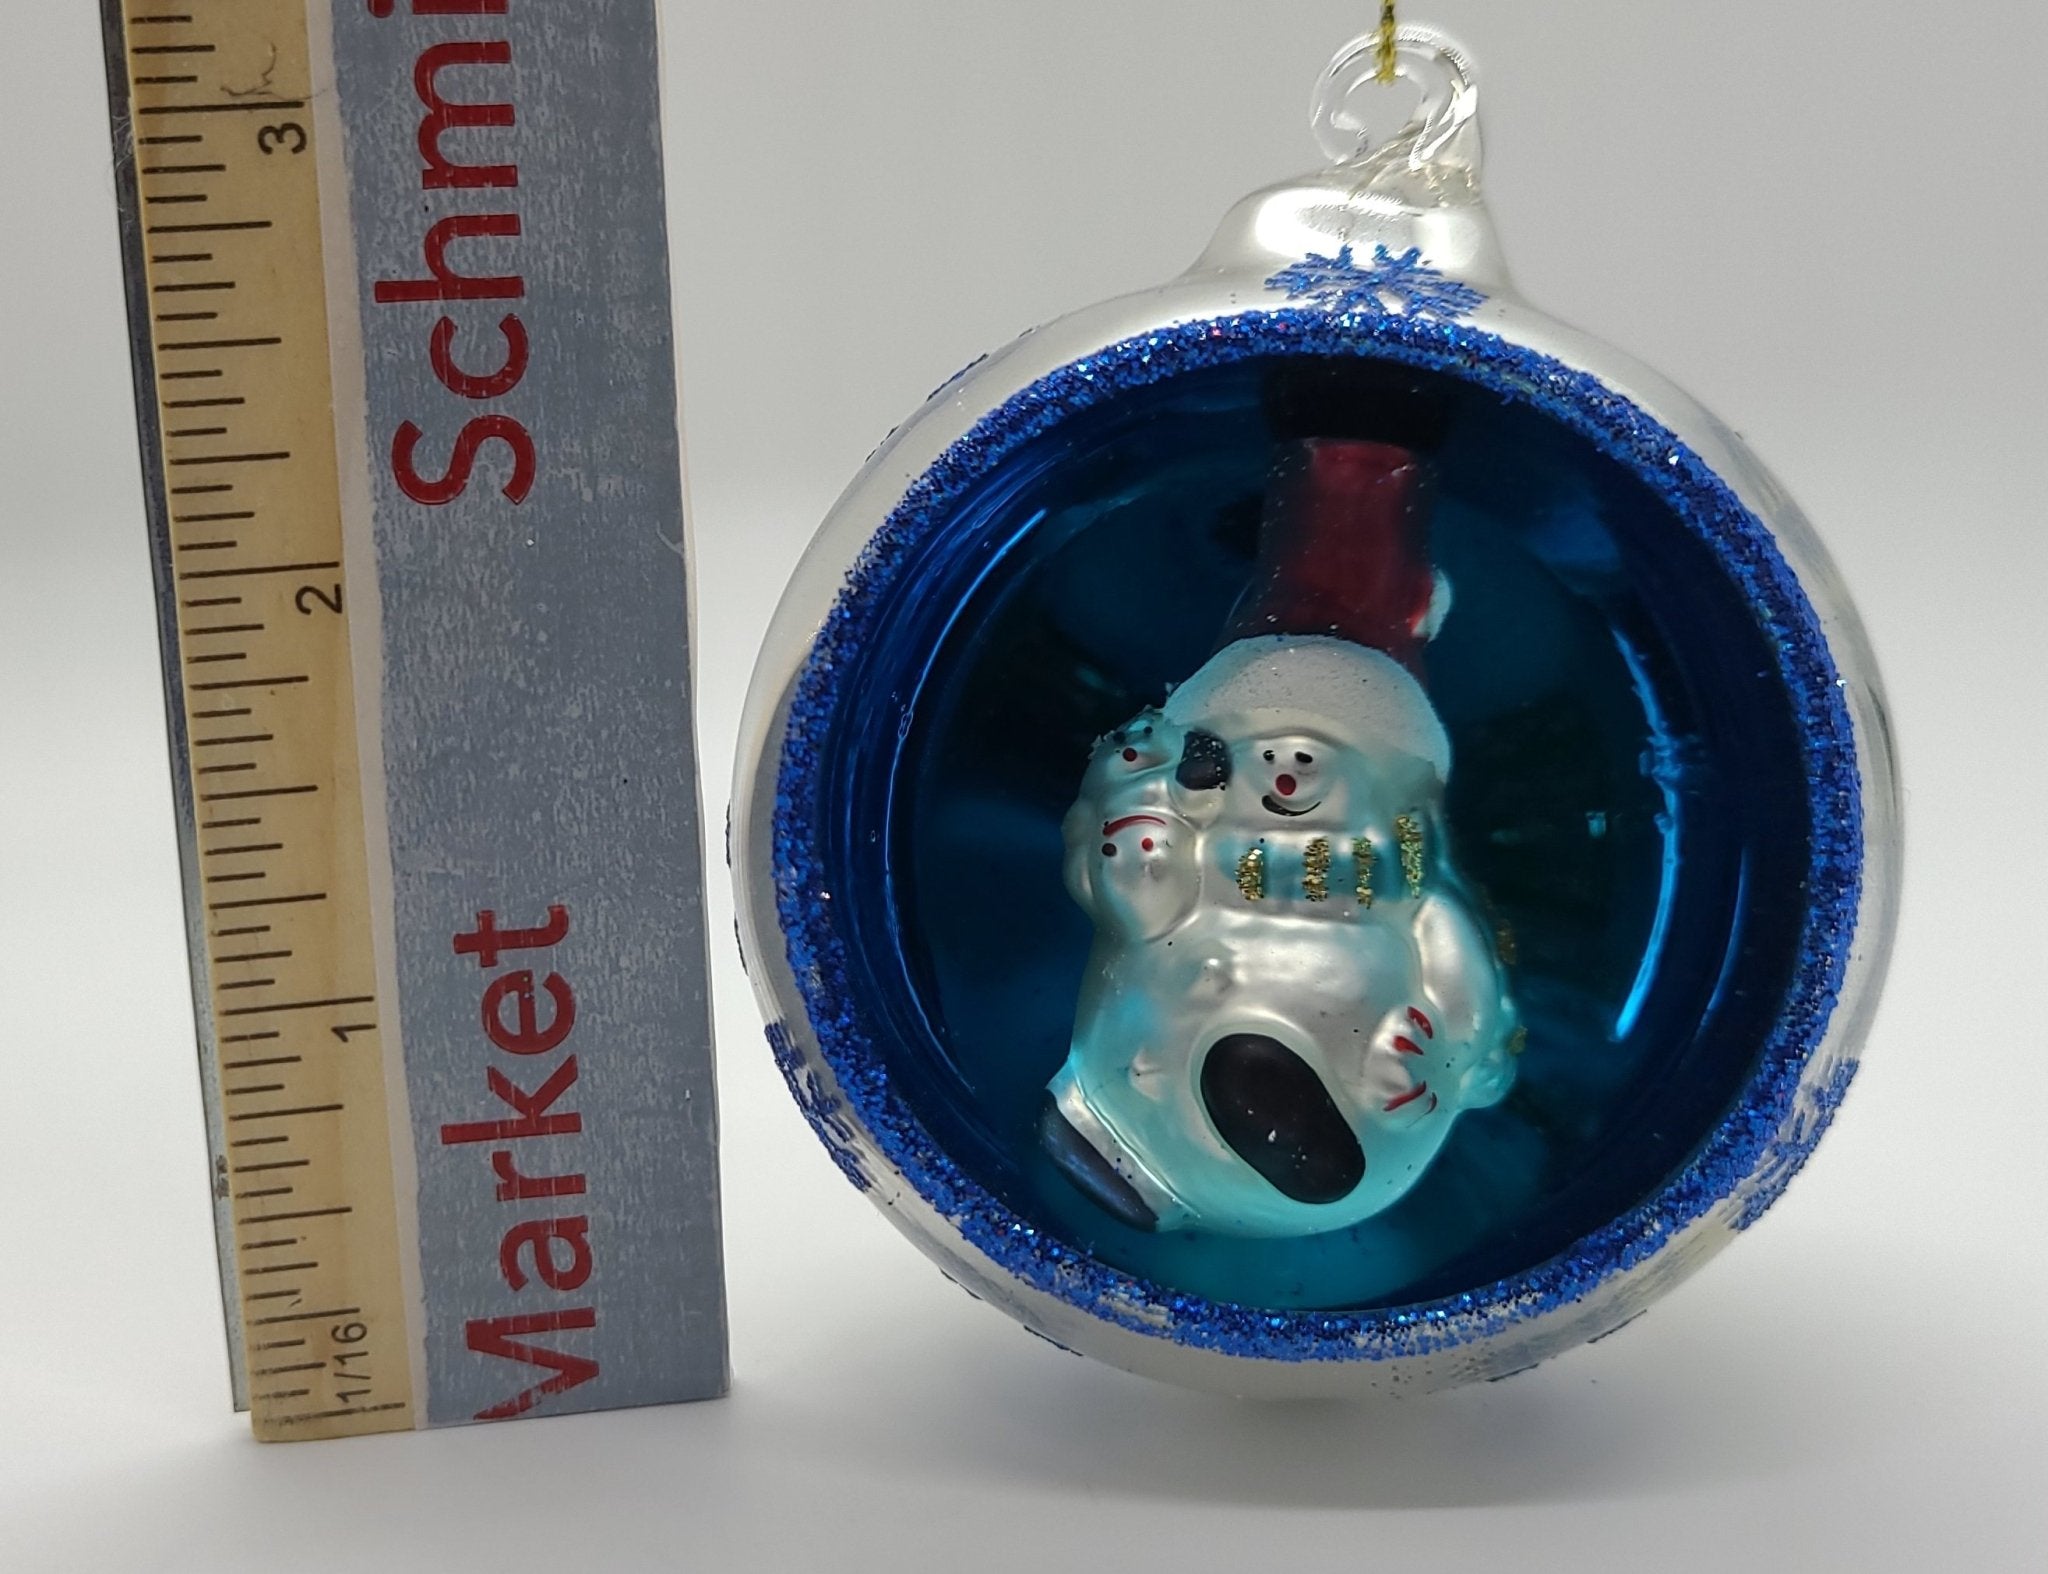 Silver colored Glass Reflector 3" Ball with Snowman inside Ornament - Schmidt Christmas Market Christmas Decoration